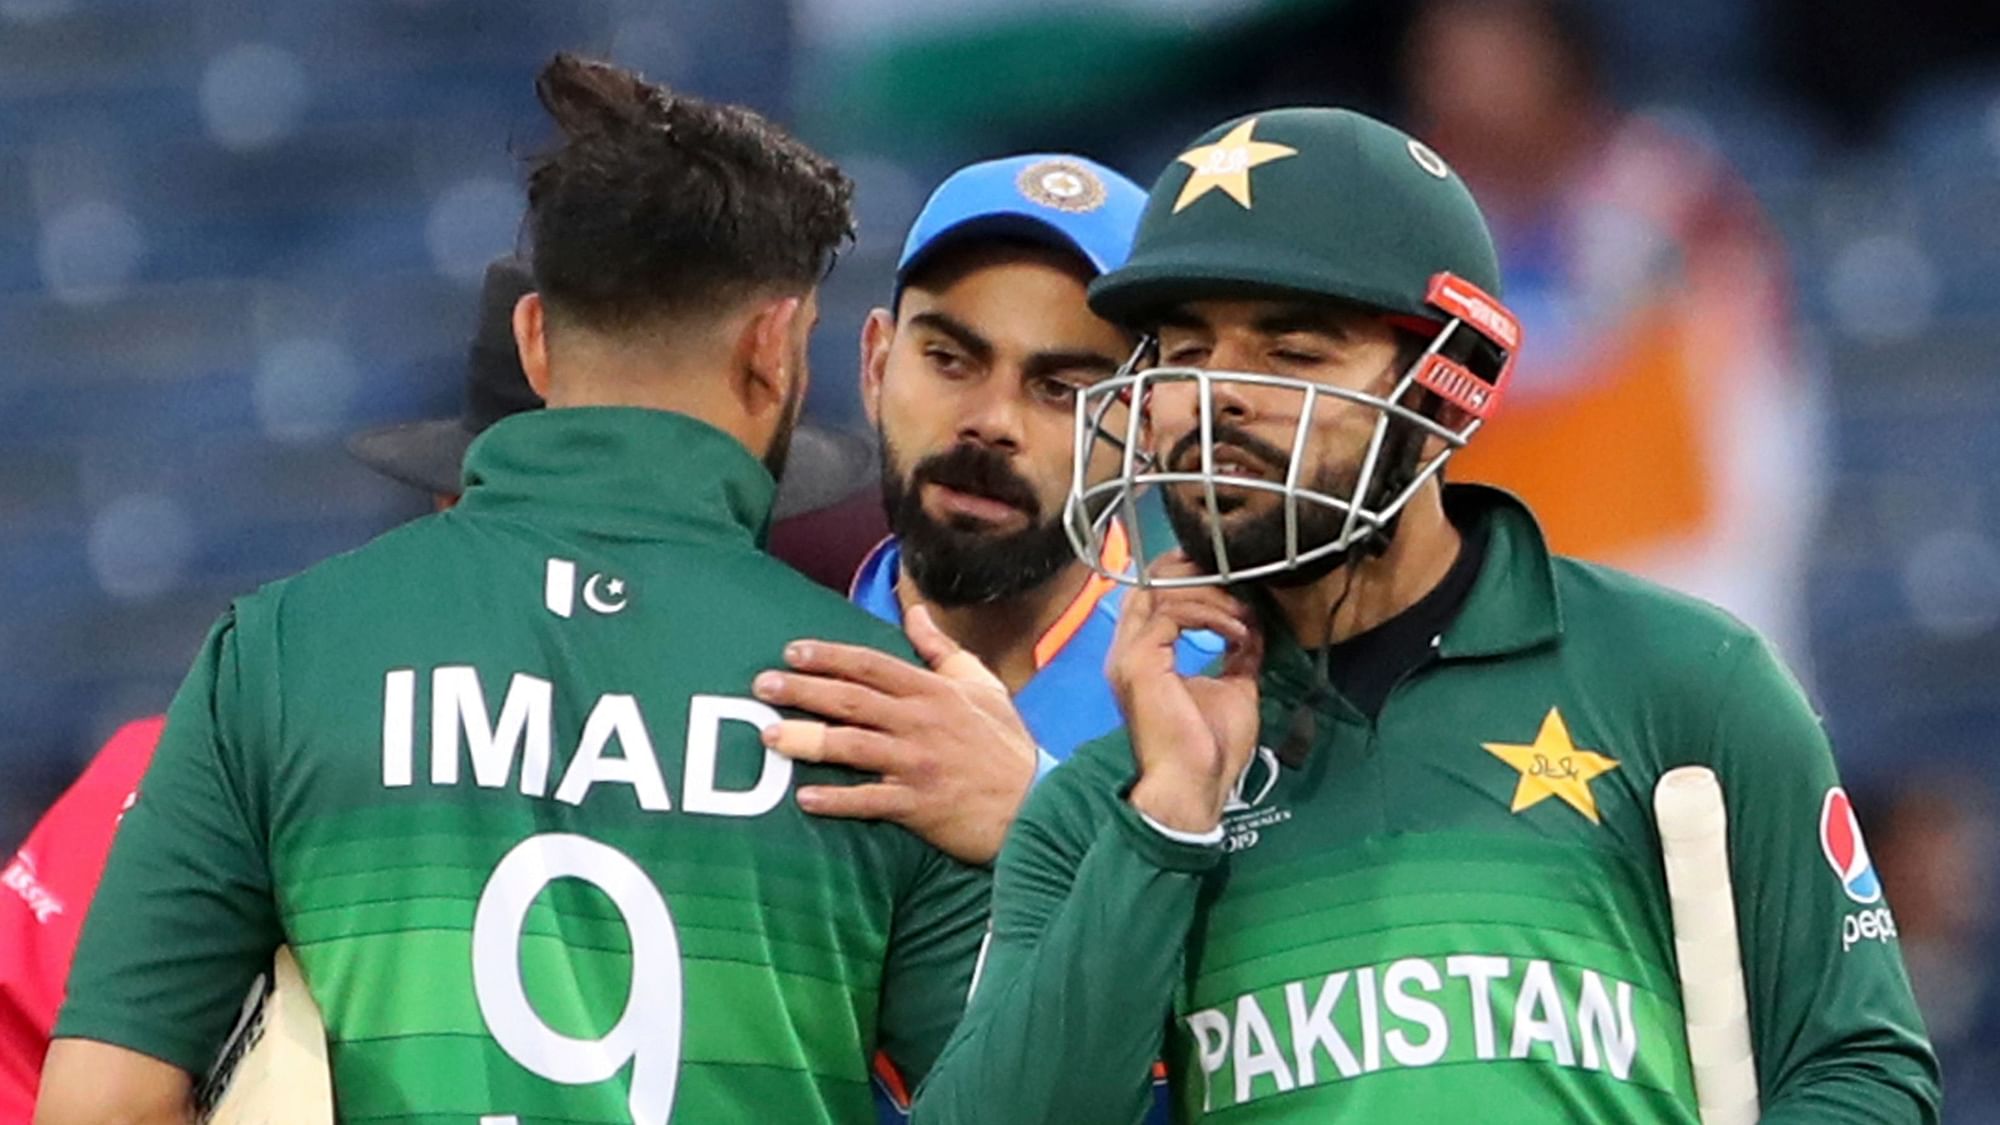 India’s captain Virat Kohli, center, greets Pakistan players at the end of the Cricket World Cup match between India and Pakistan.